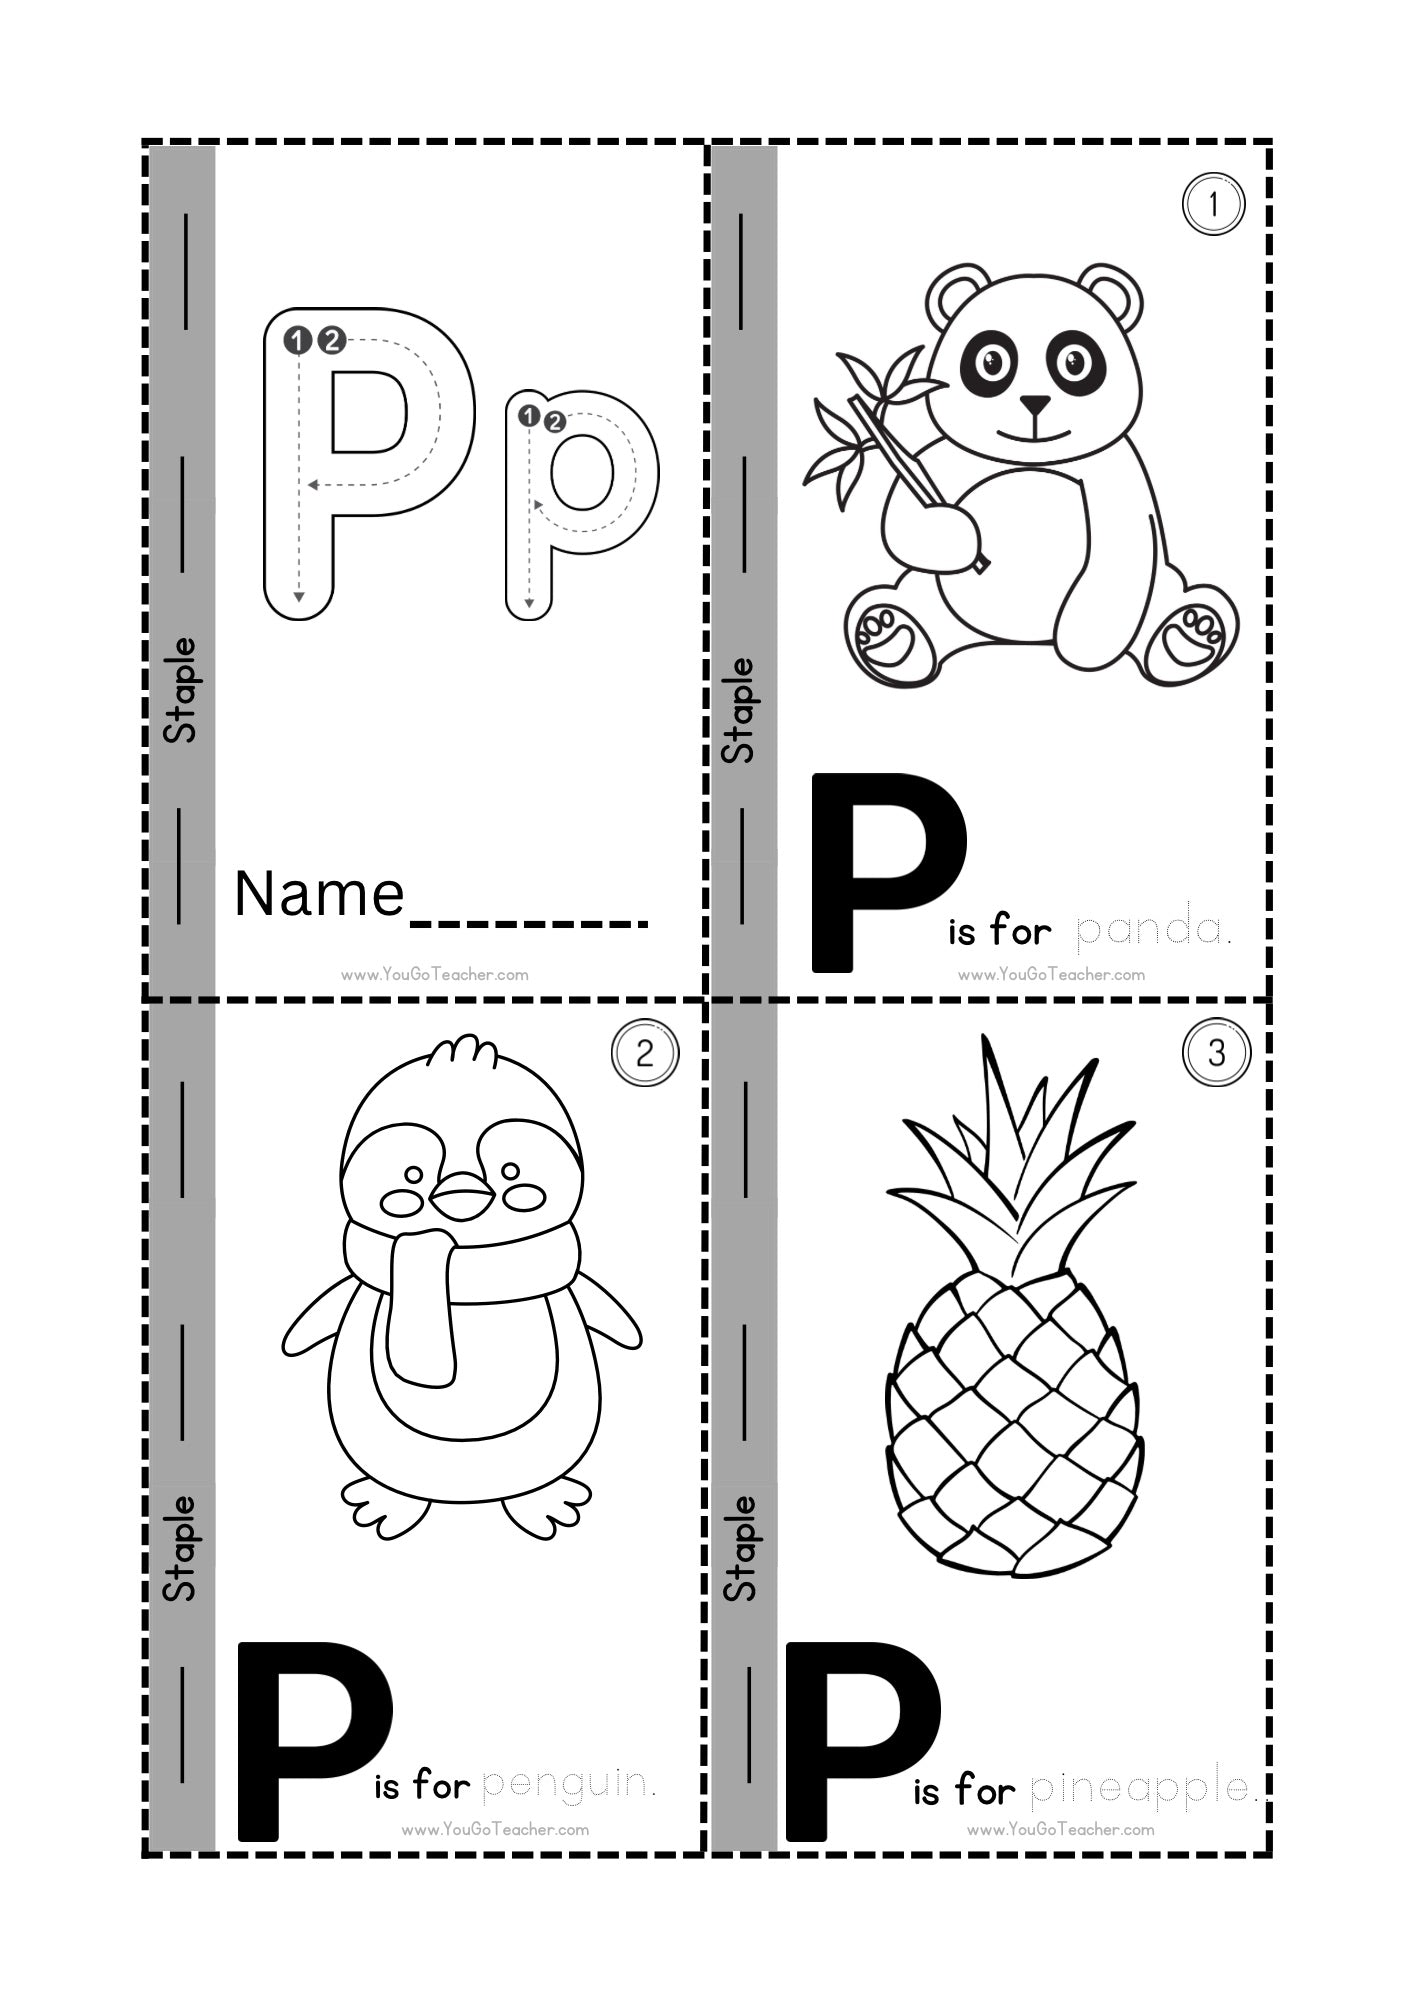 Phonics Worksheets: Trace Letter ‘P’ Booklet